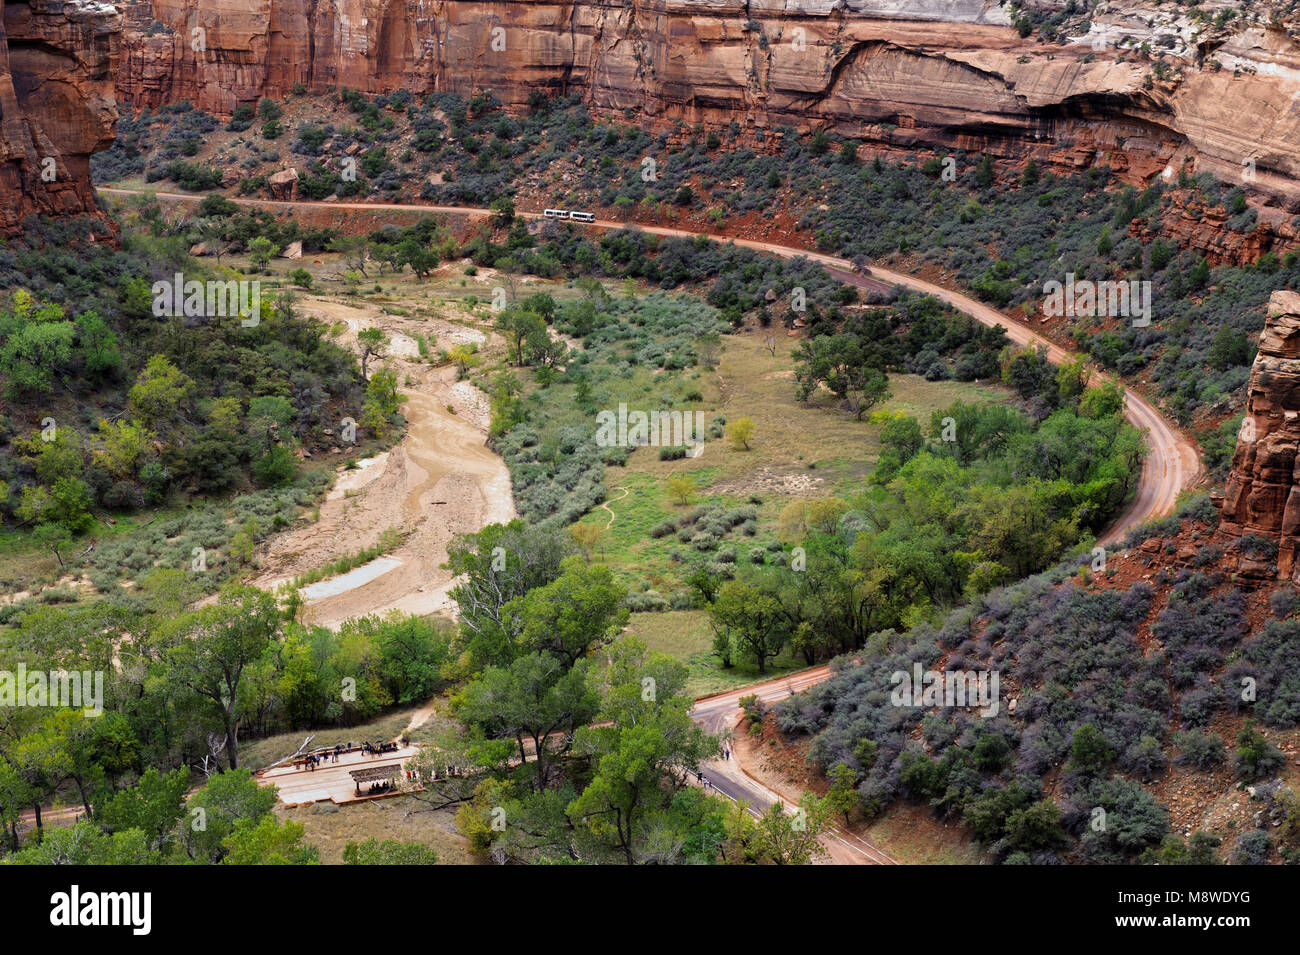 Big Bend area viewed from Hidden Canyon trail, Zion National Park, Utah, USA. Stock Photo